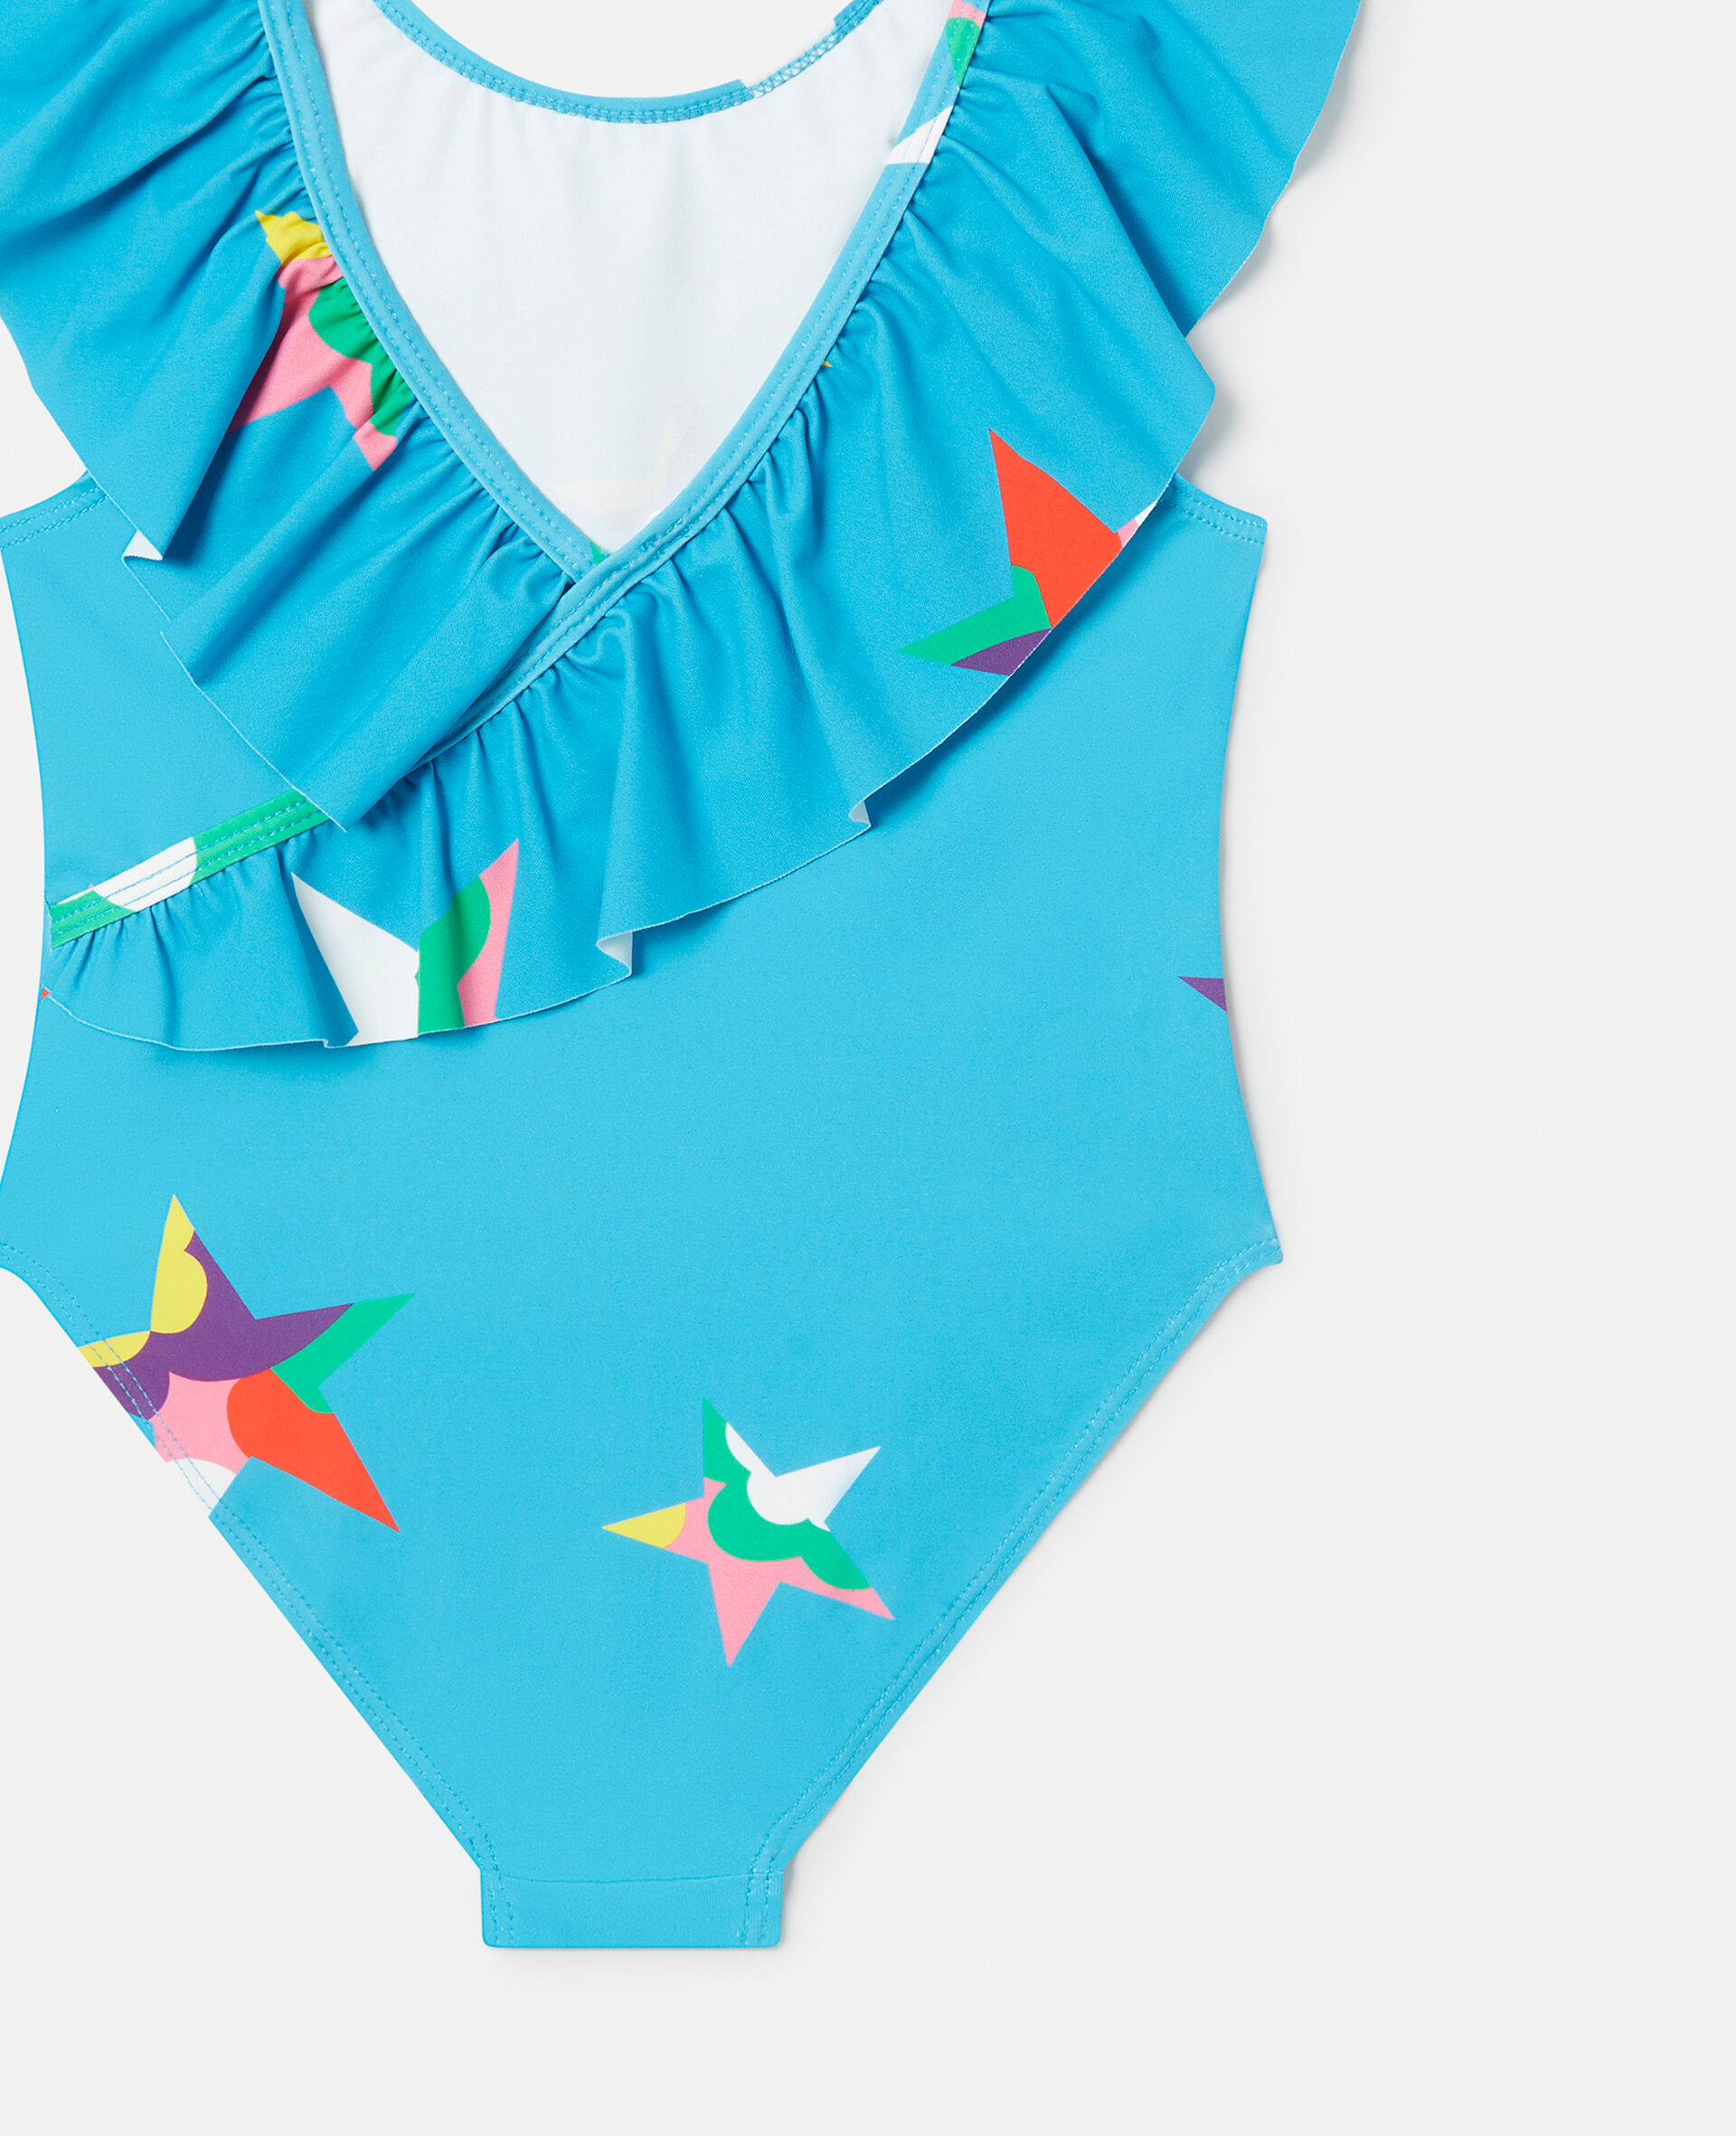 Star Print Ruffle Swimsuit-Multicolour-large image number 3